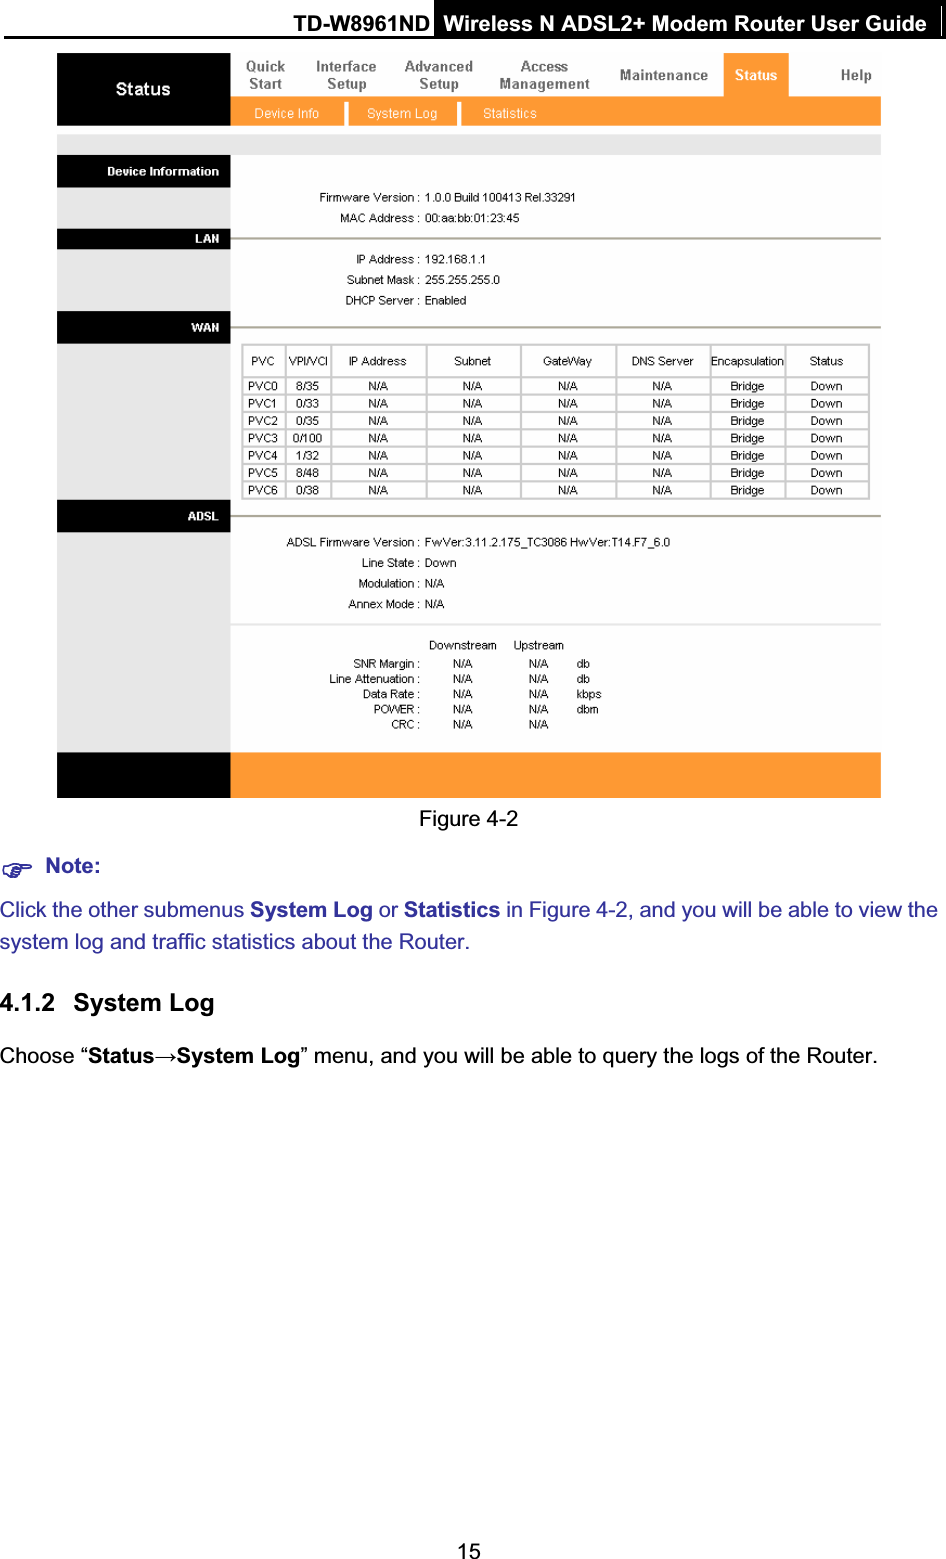 TD-W8961ND Wireless N ADSL2+ Modem Router User Guide15Figure 4-2 )Note:Click the other submenus System Log or Statistics in Figure 4-2, and you will be able to view the system log and traffic statistics about the Router. 4.1.2 System Log Choose “StatusĺSystem Log” menu, and you will be able to query the logs of the Router. 